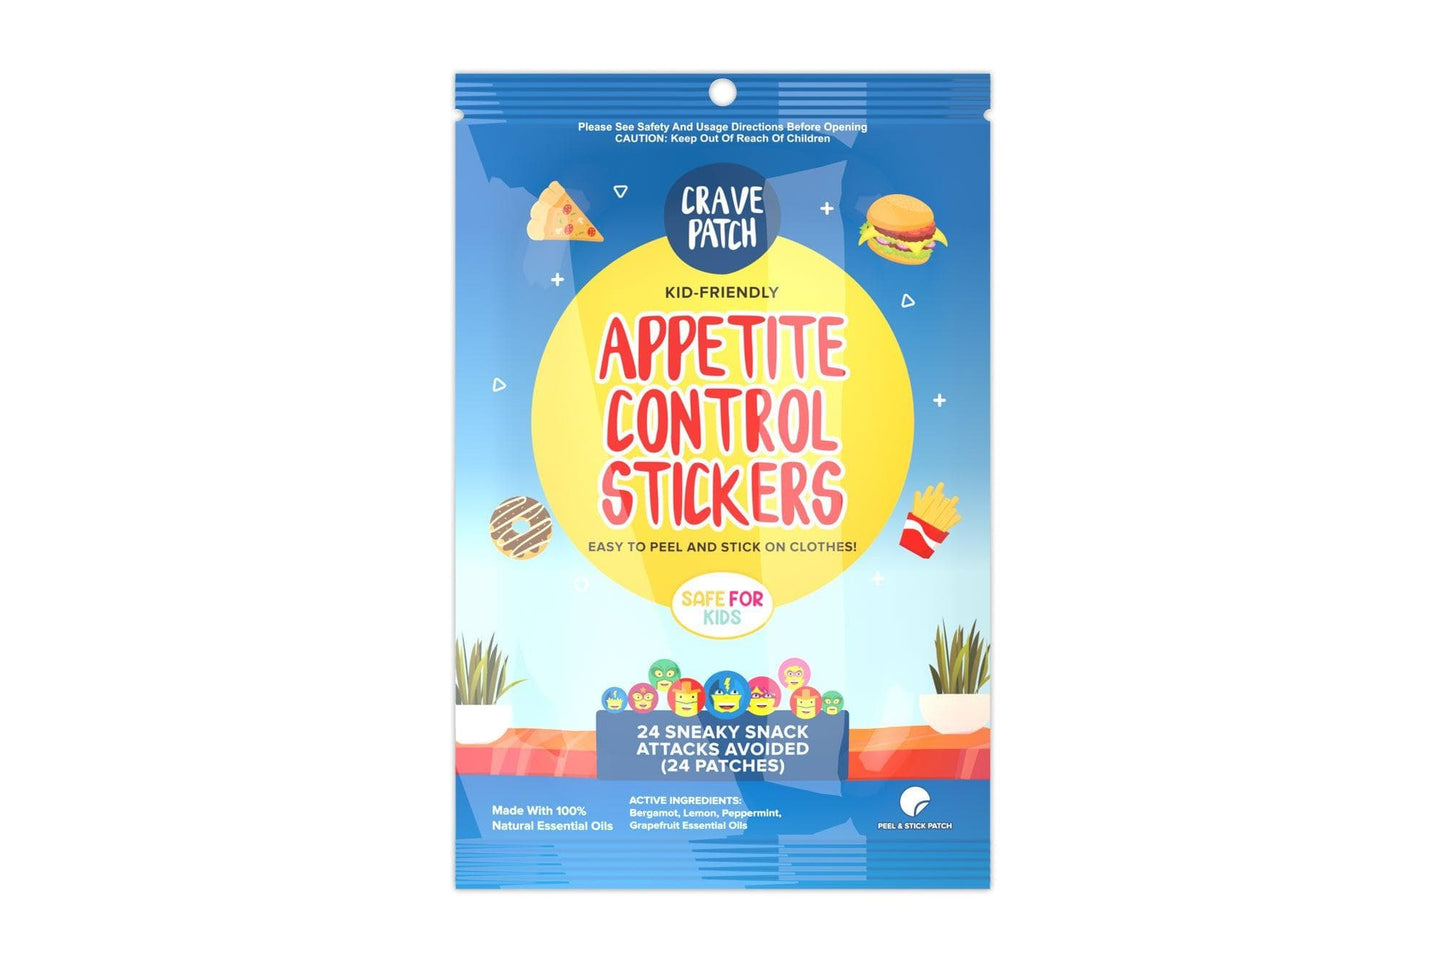 30 x CravePatch Appetite Control Stickers individual resale packets in a Retail Display Box*